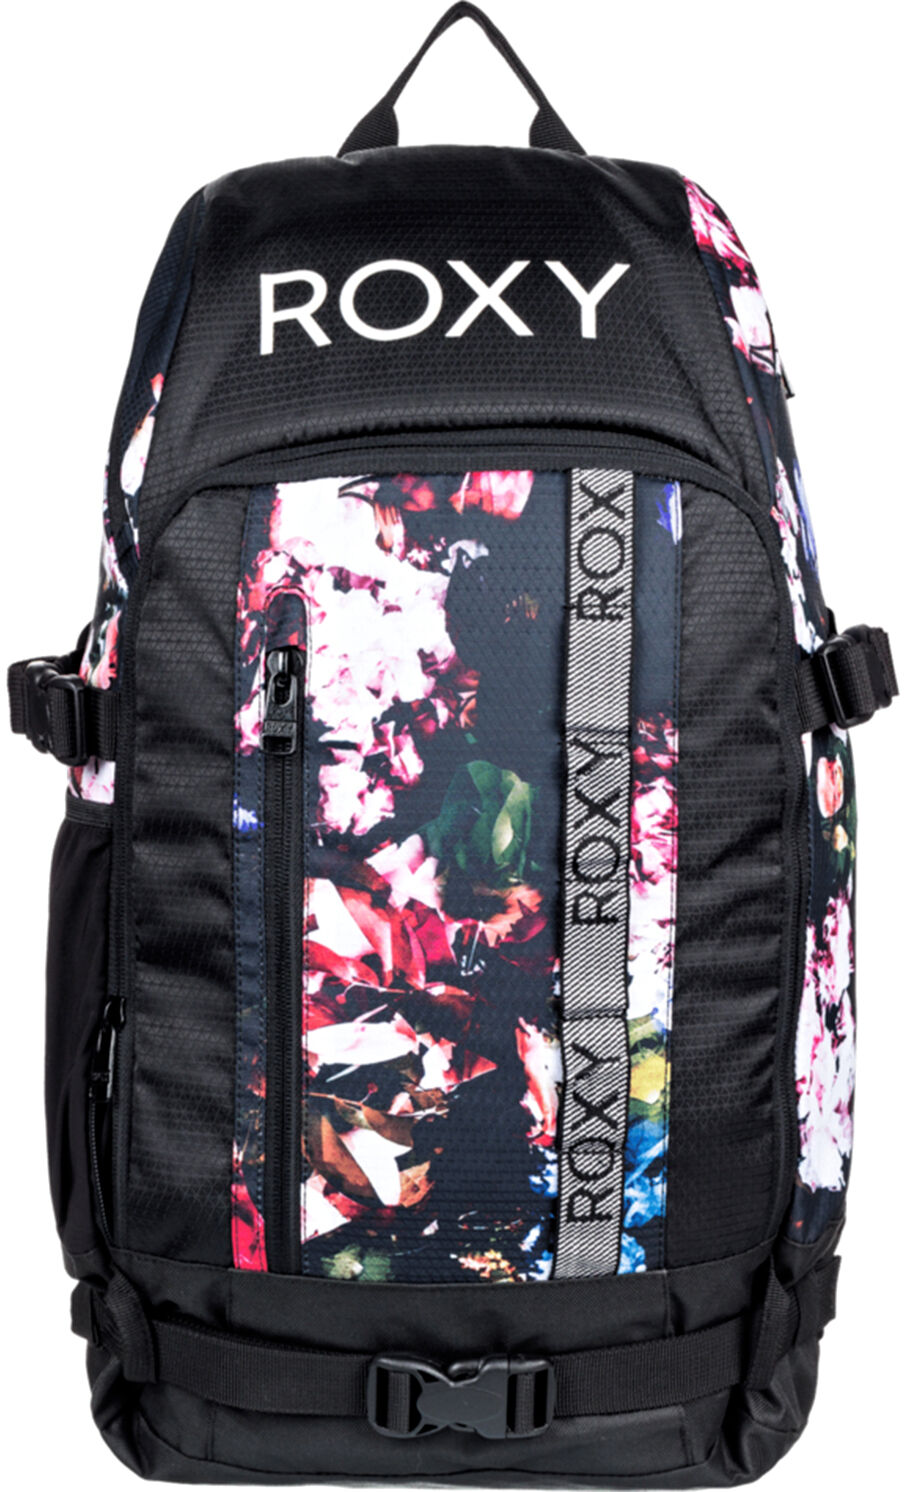 Roxy TRIBUTE BACKPACK TRUE BLACK BLOOMING PARTY One Size